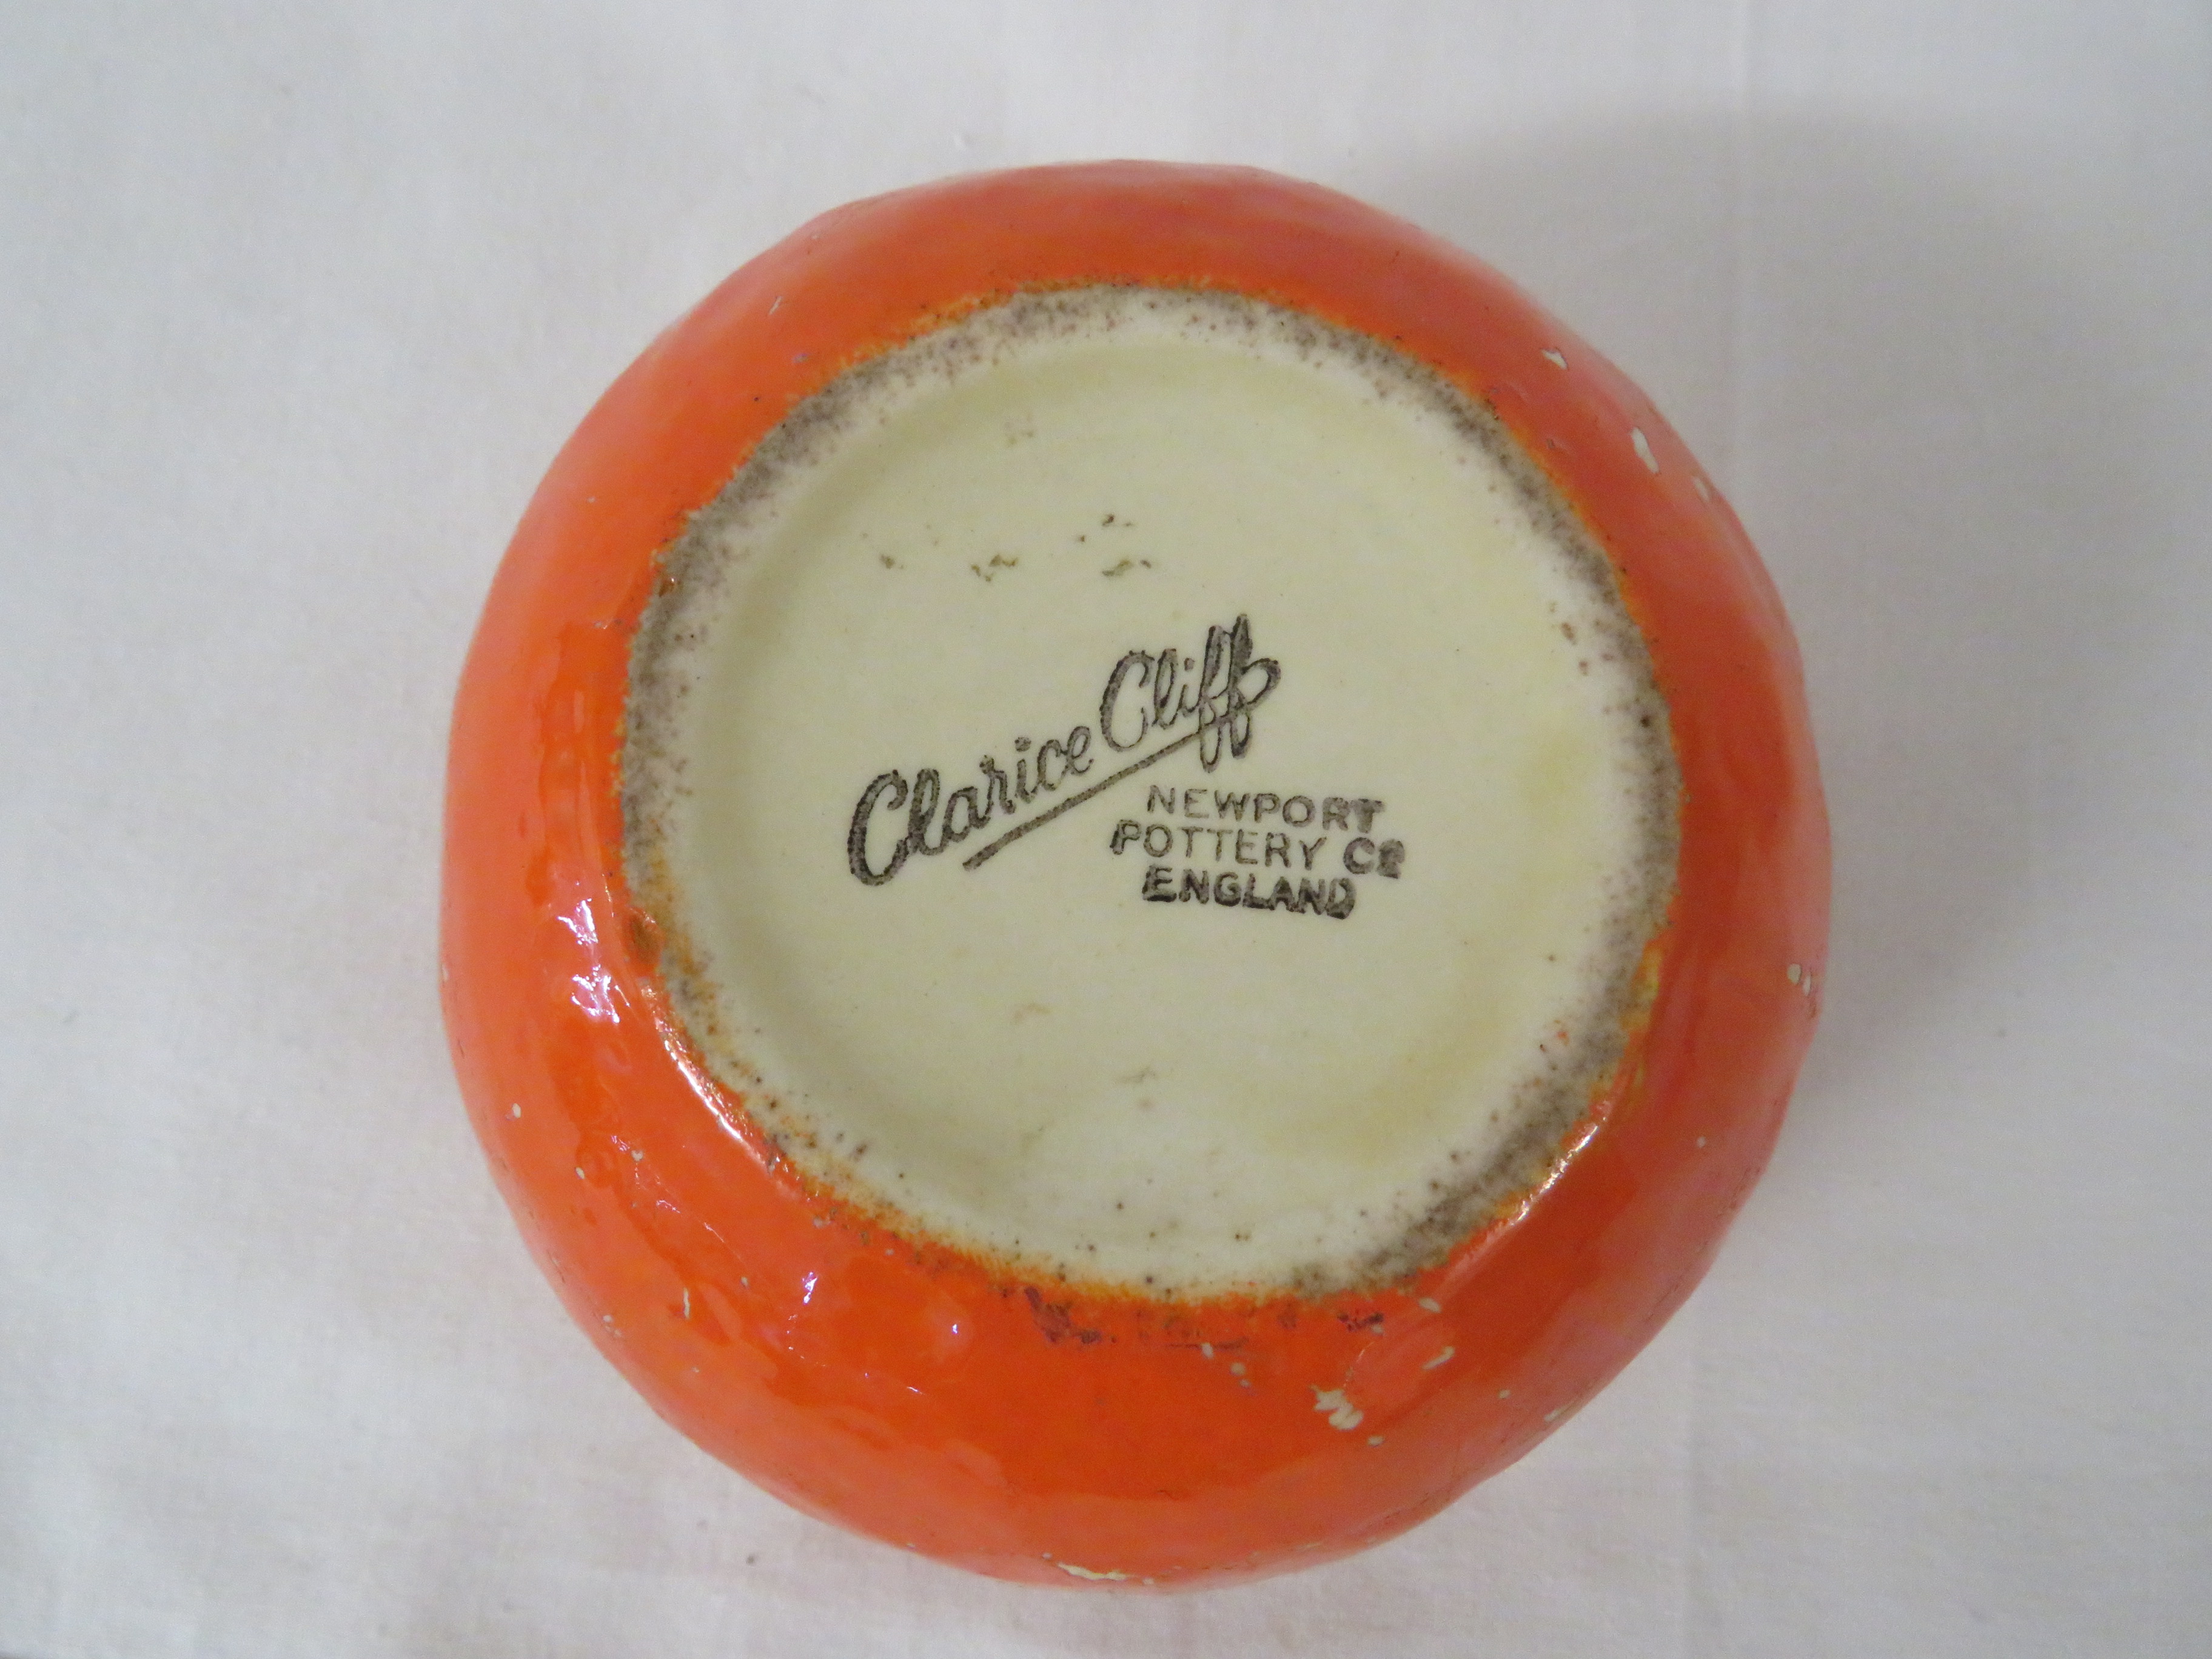 Clarice Cliff Newport Pottery marmalade pot modelled as an orange - Image 4 of 6